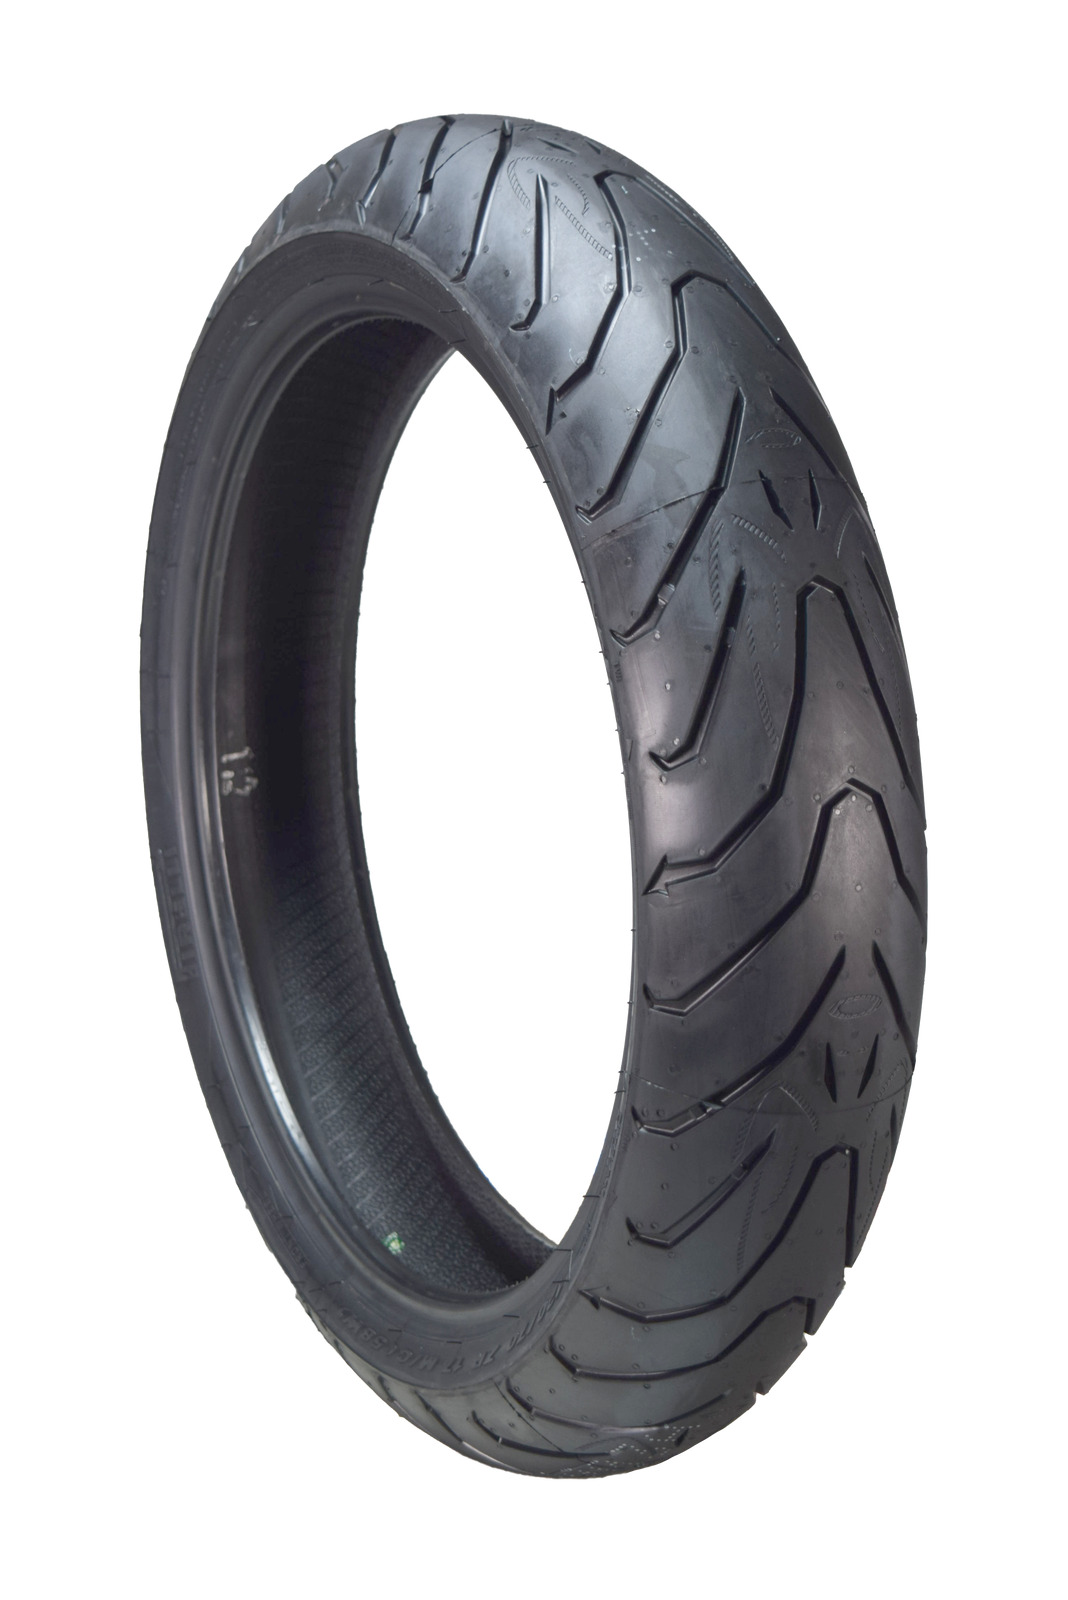 Pirelli Angel ST 120/70ZR17 Front Sport Touring Motorcycle Tire - 120/70-17